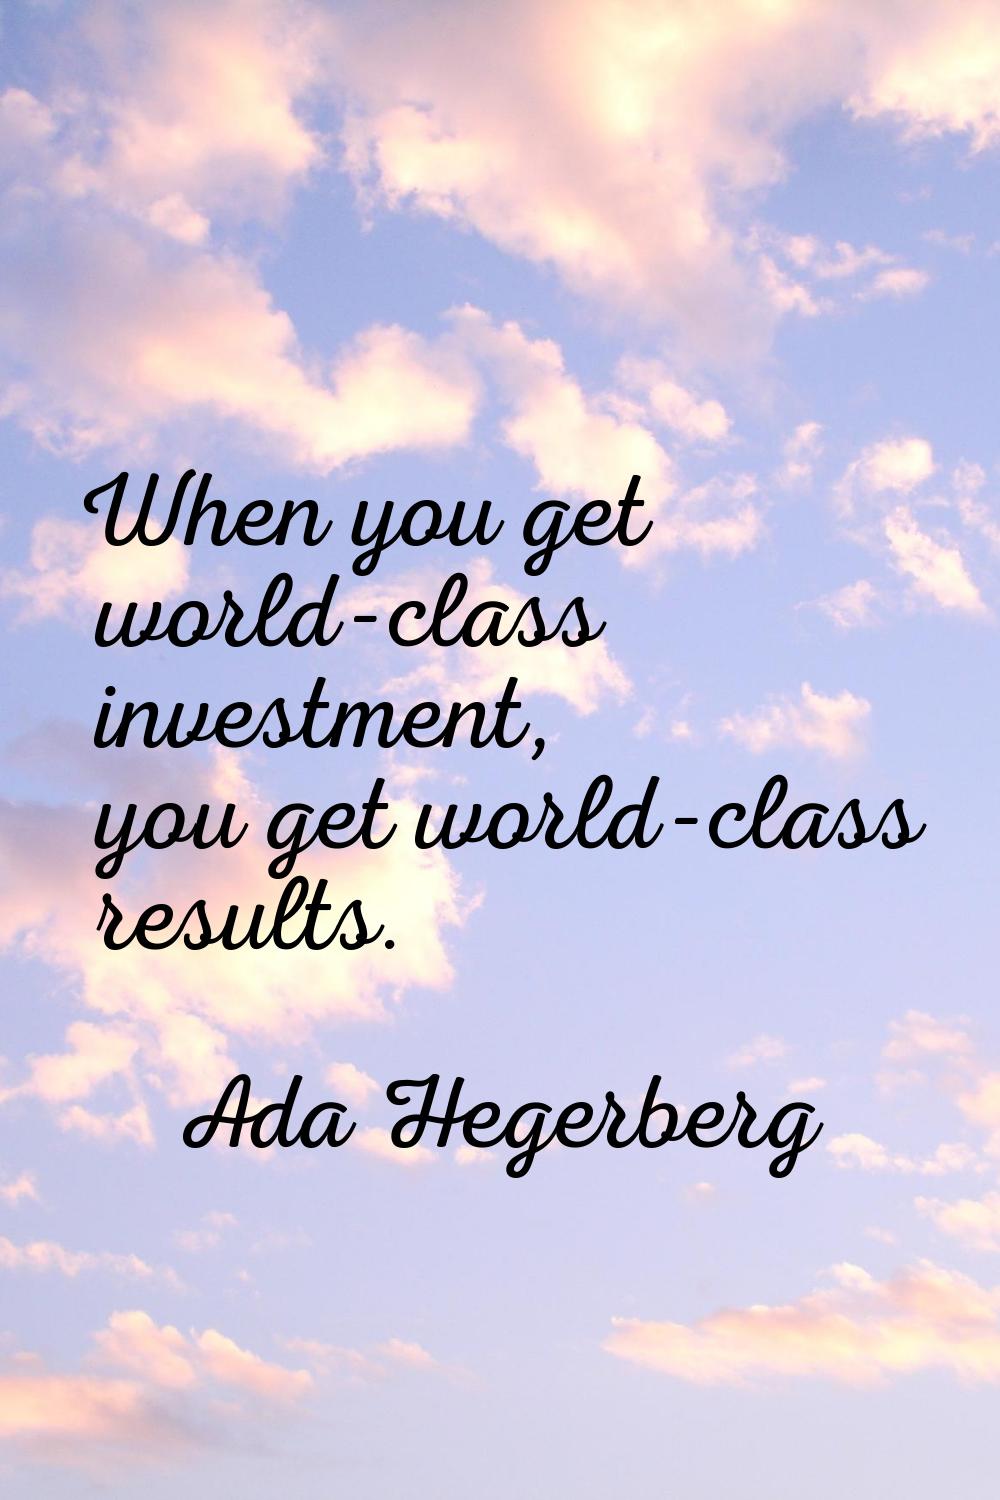 When you get world-class investment, you get world-class results.